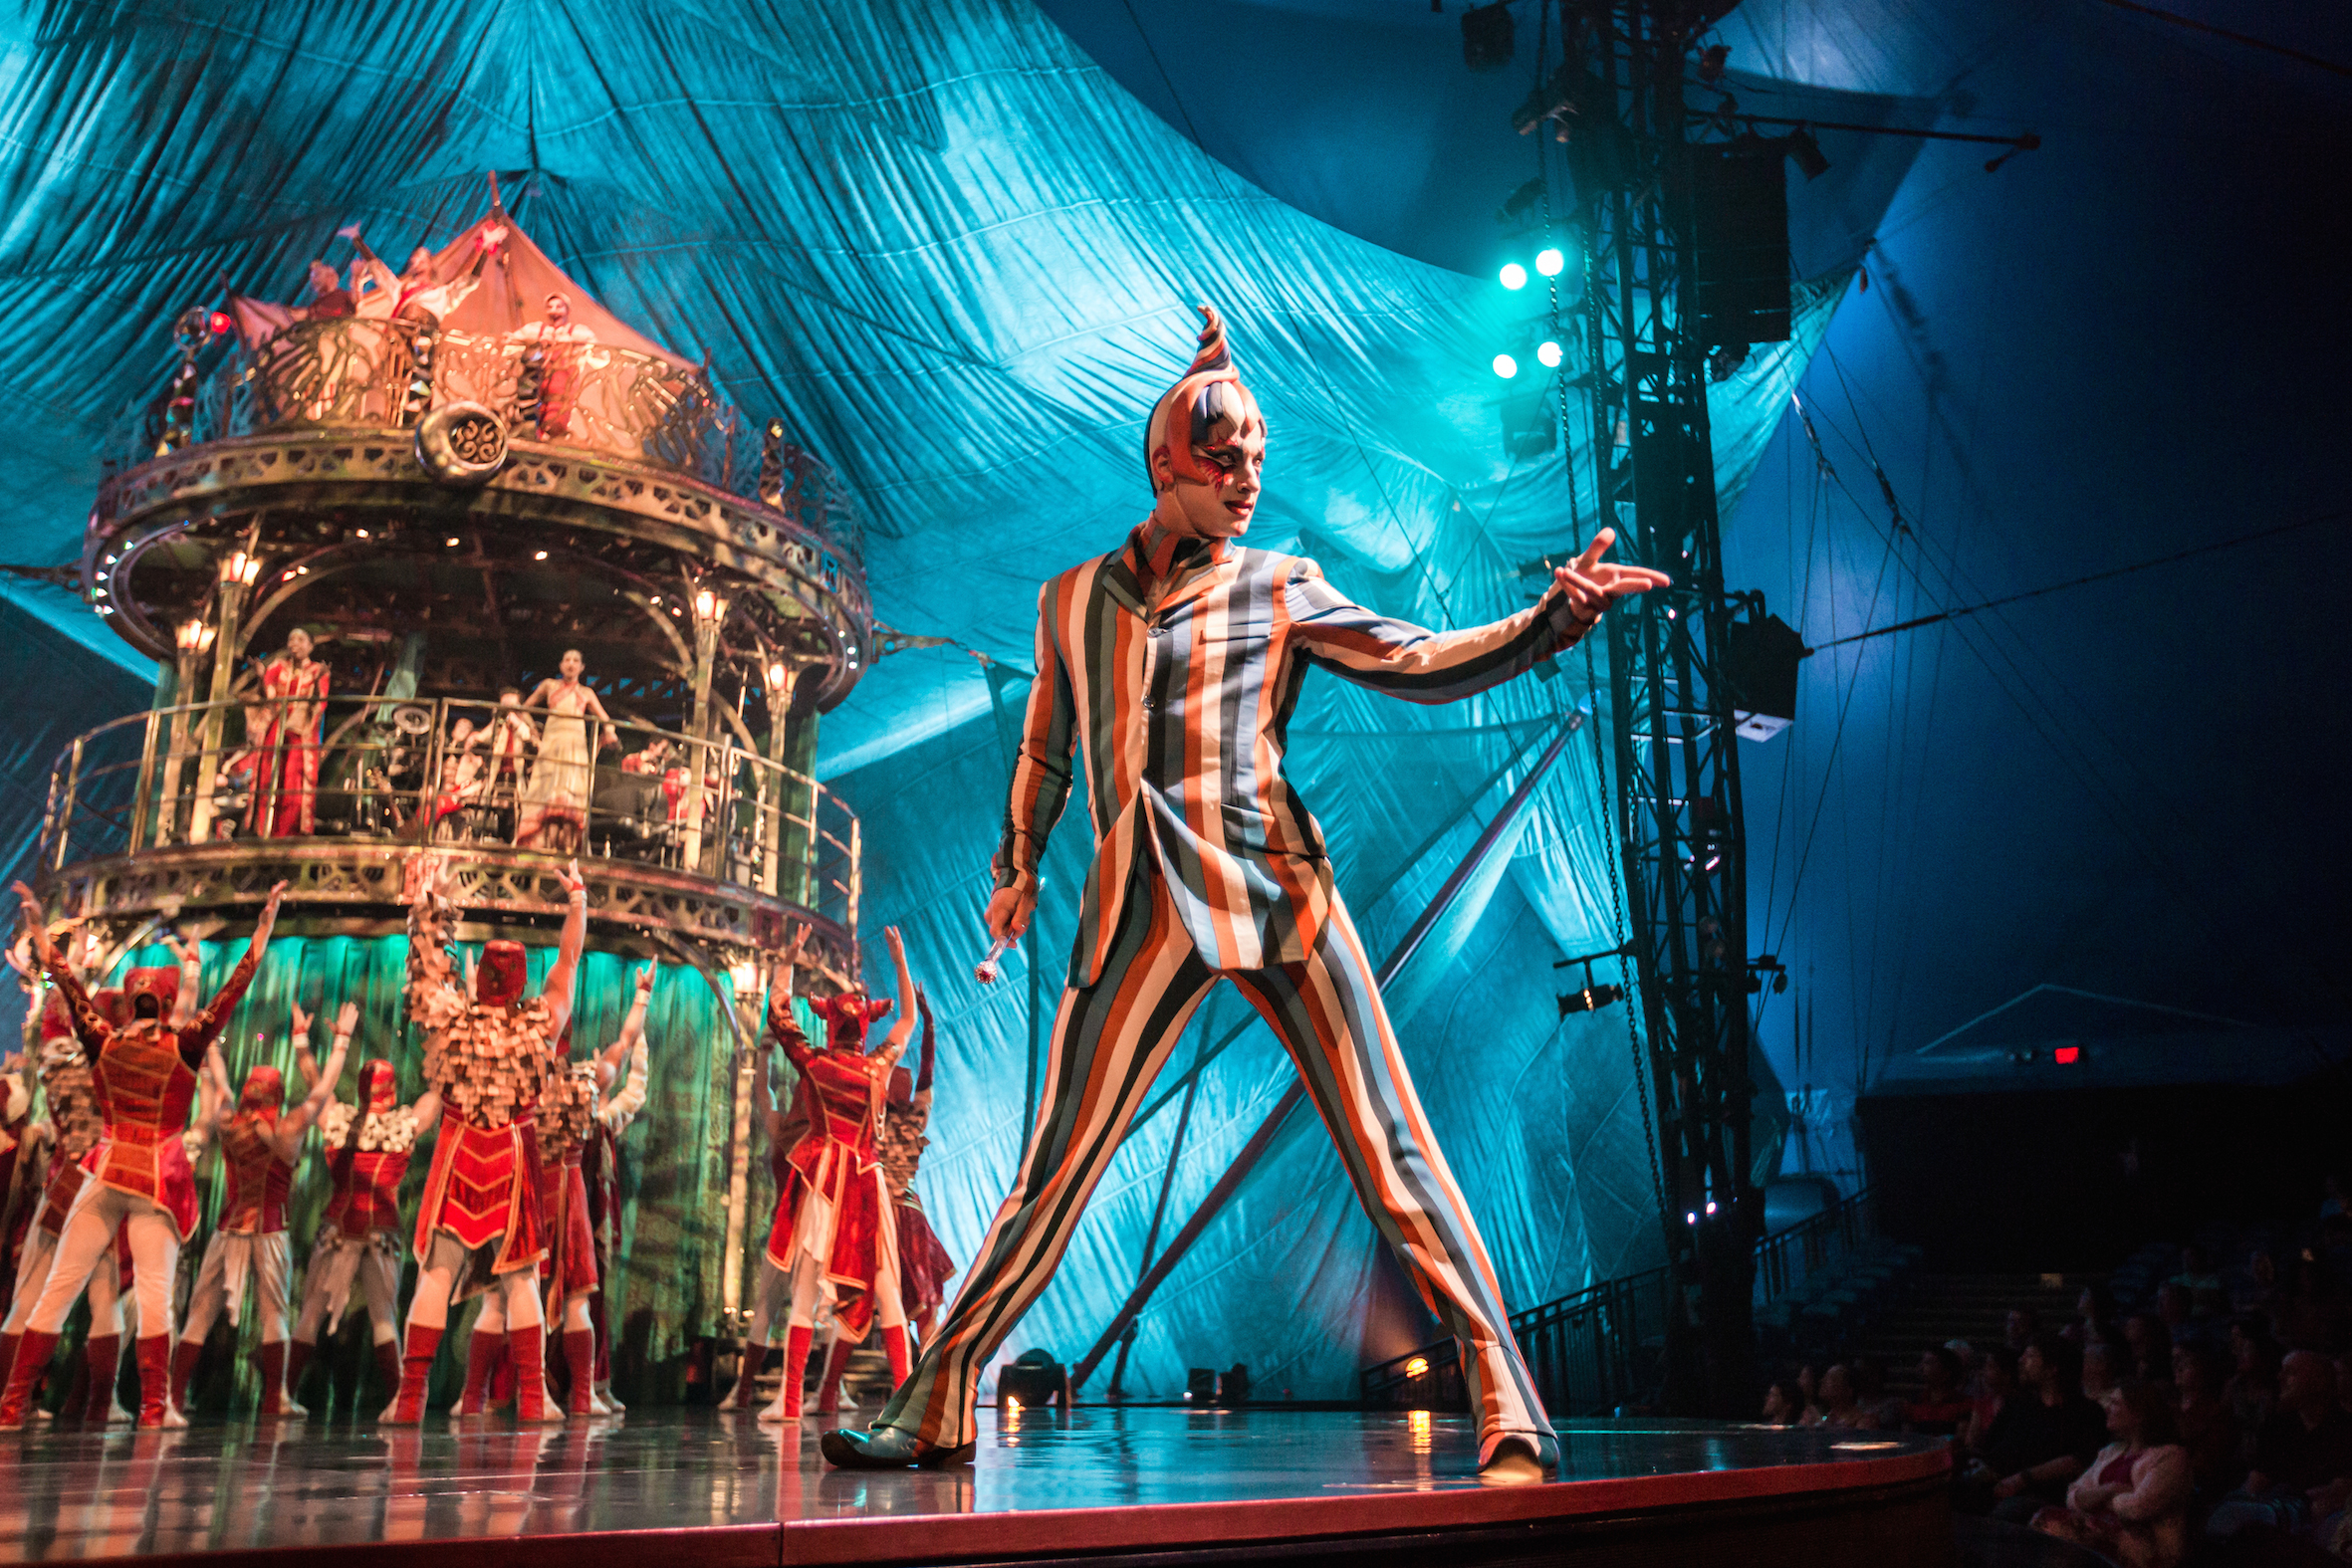 Cirque Du Soleil Seven Need to Know Facts About the KOOZA Show at the Royal Albert Hall